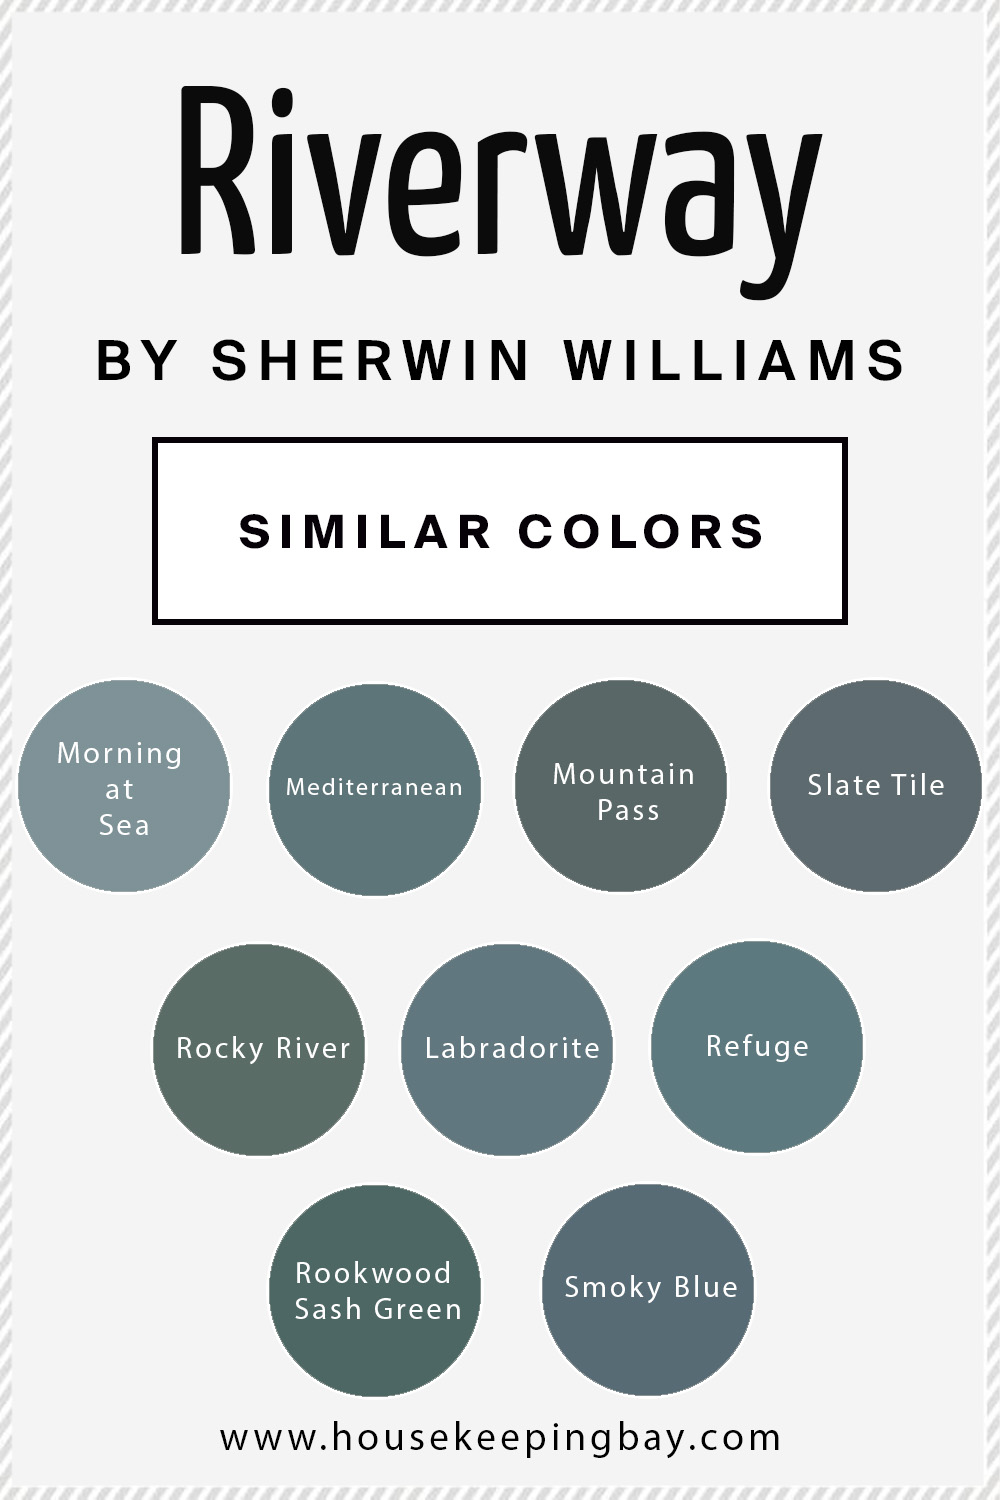 riverway by sherwin williams similar colors